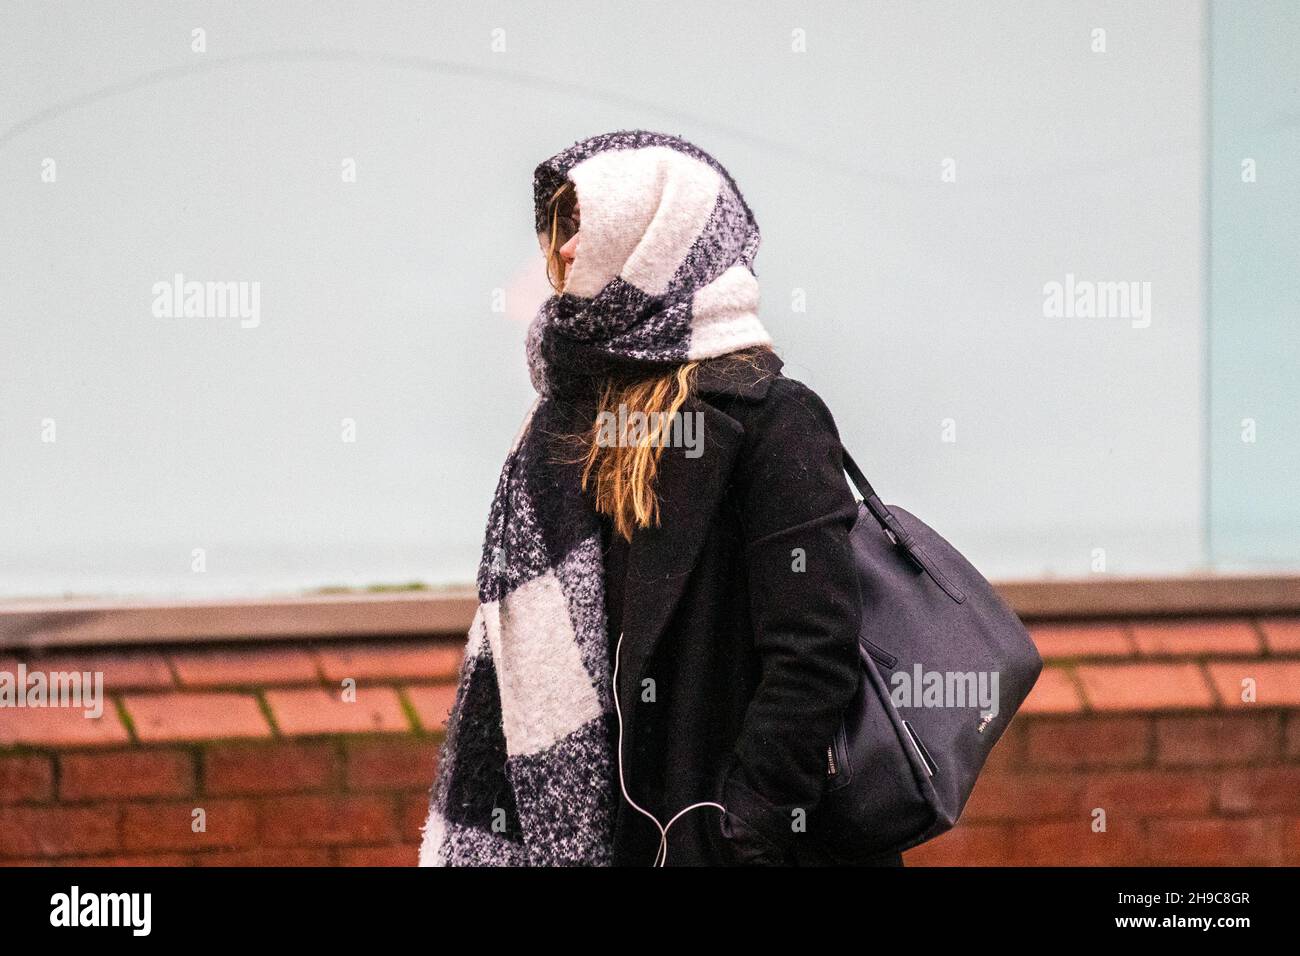 Preston, Lancashire.   Uk Weather 6 Dec 2021. Shops, shoppers, shopping in the city centre on a wet and windy day. A weather warning for 50mph winds is set to come into force as Storm Barra approaches.  Credit: MediaWorldImages/AlamyLiveNews Stock Photo